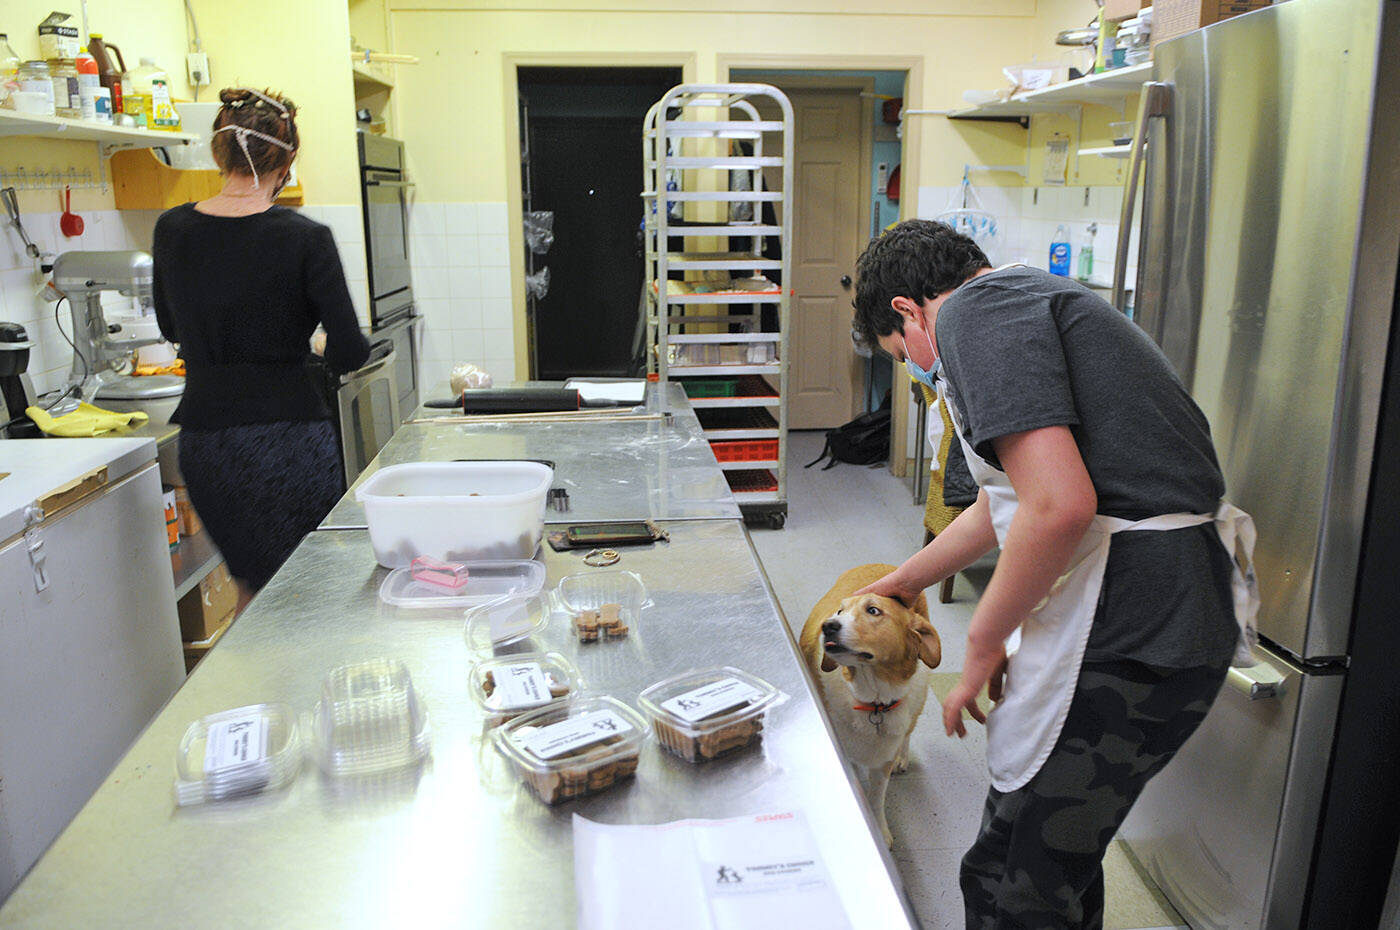 Ryder Newhouse, 14, takes a break to pet Tommy as she eyes dog cookies that will soon be for her during a work experience project at Fergies Doggie Delight Pet Bakery on Friday, Dec. 10, 2021. (Jenna Hauck/ Chilliwack Progress)